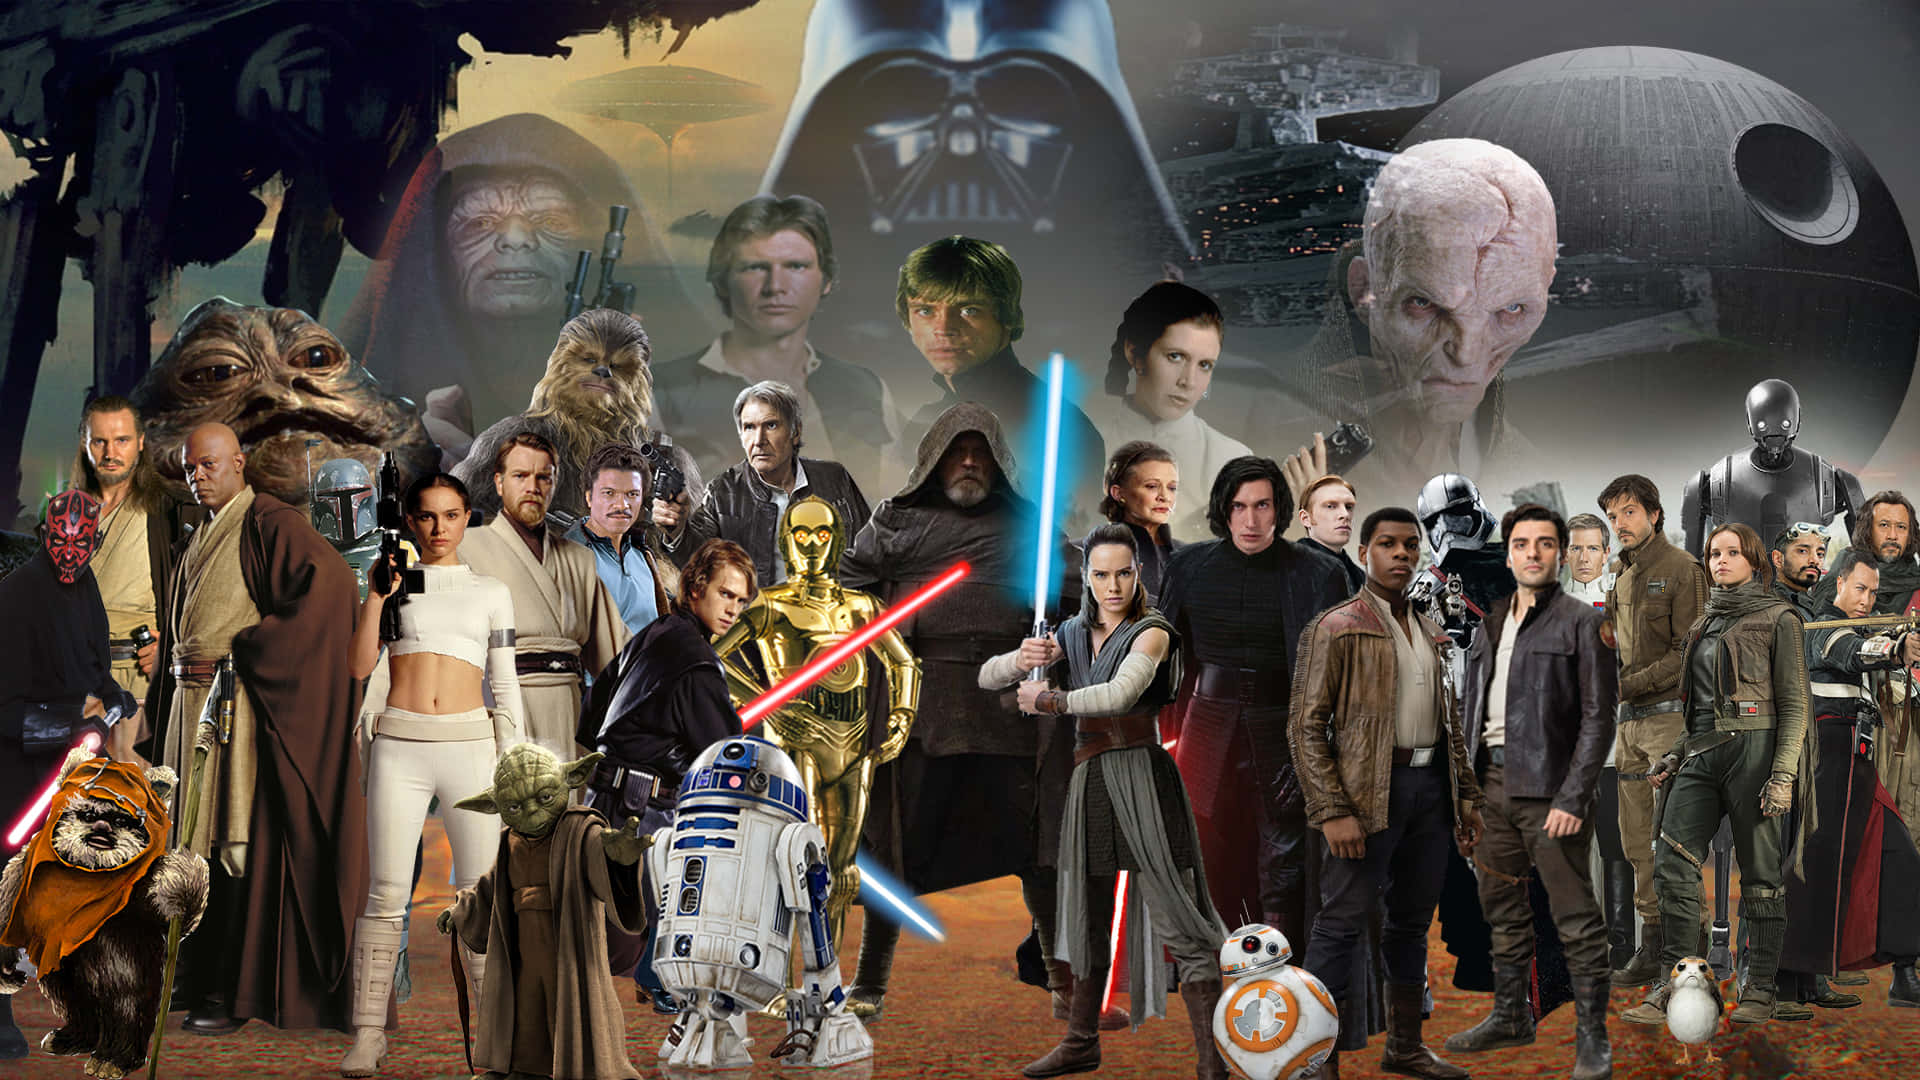 Image  The Heroes of the Rebellion - Star Wars Characters Wallpaper